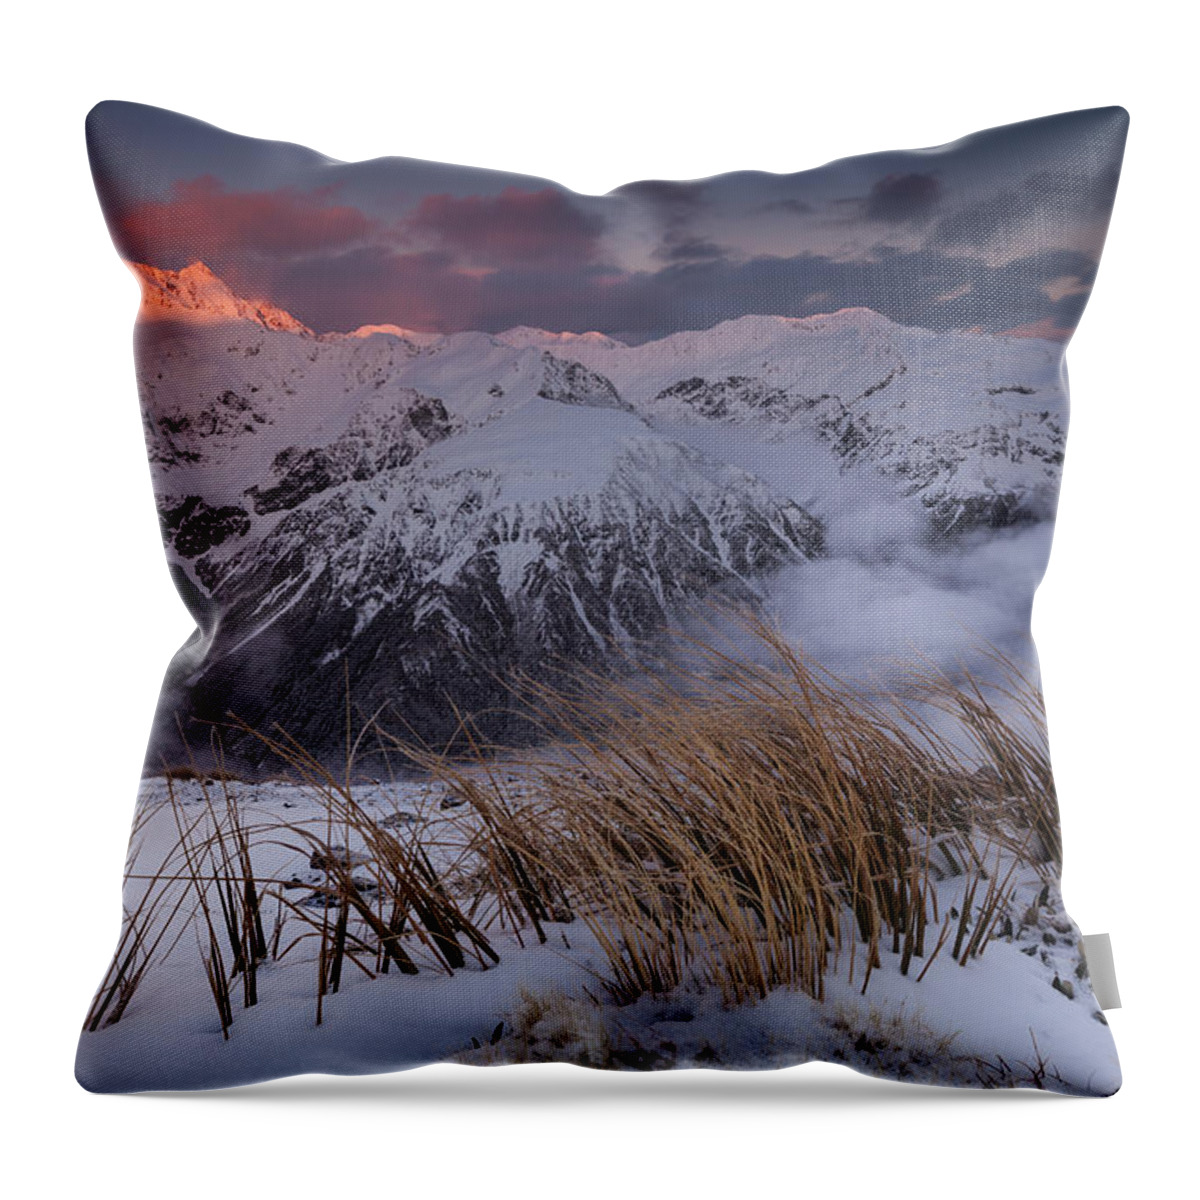 Feb0514 Throw Pillow featuring the photograph Mount Rolleston At Dawn New Zealand by Colin Monteath